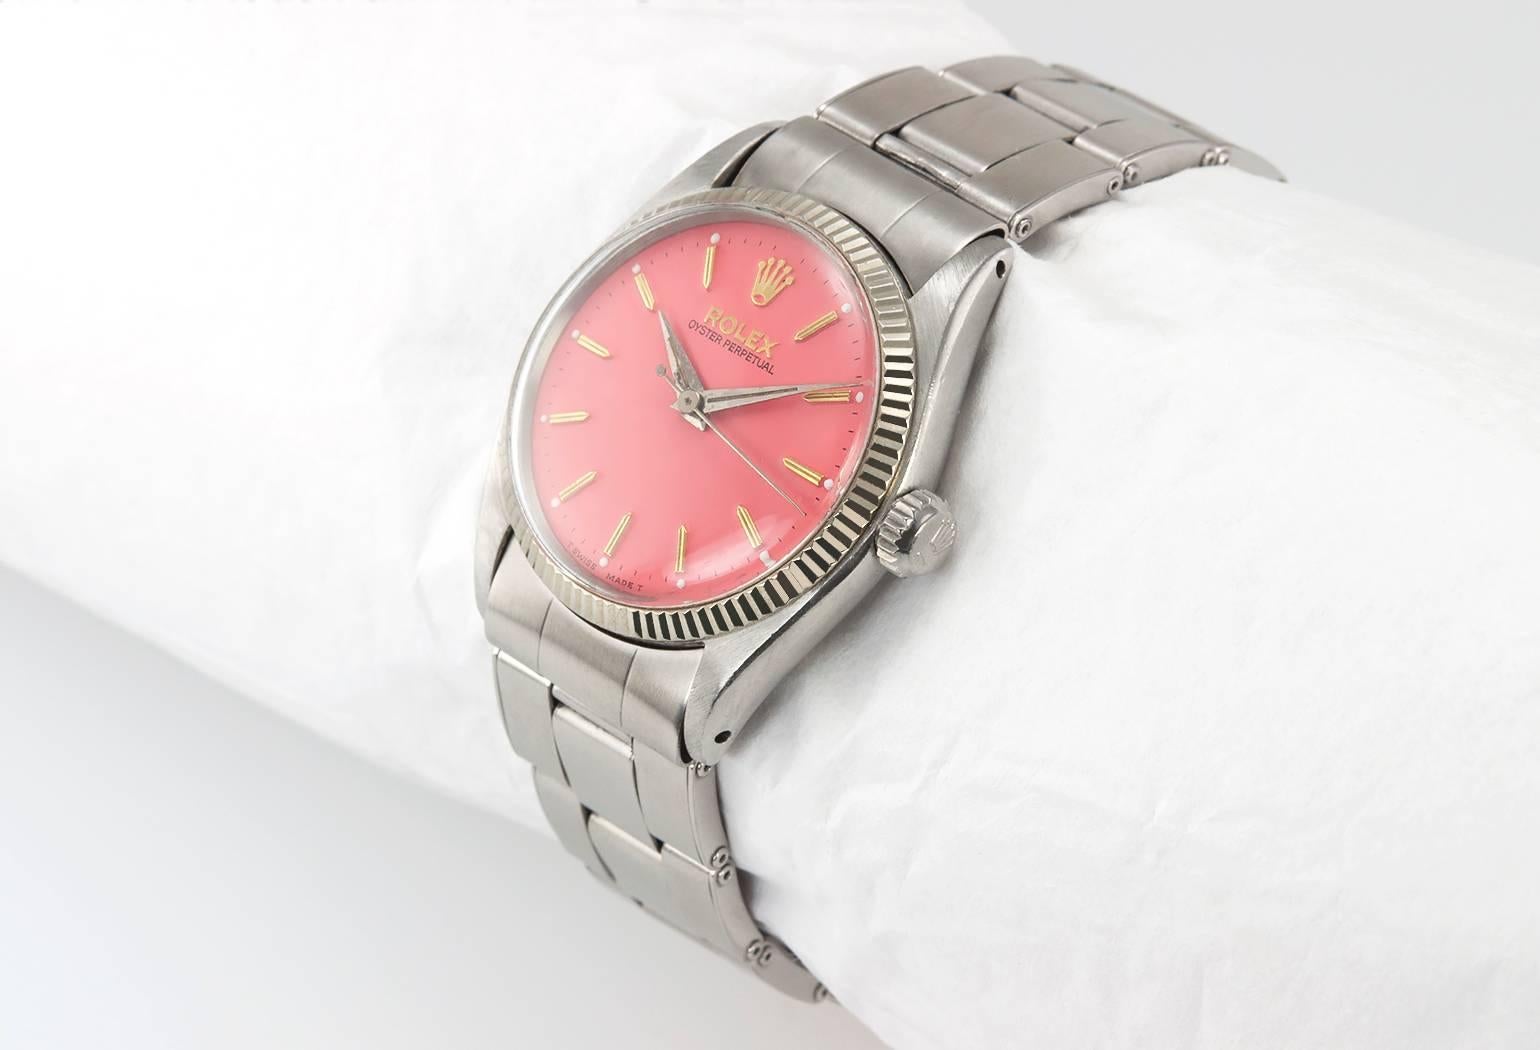 Rolex Oyster Perpetual stainless steel wristwatch, reference 6551. This MidSize Rolex watch features a plastic crystal, stainless steel waterproof crown, white gold fluted bezel, and a custom pink color dial on a classic Oyster riveted bracelet.